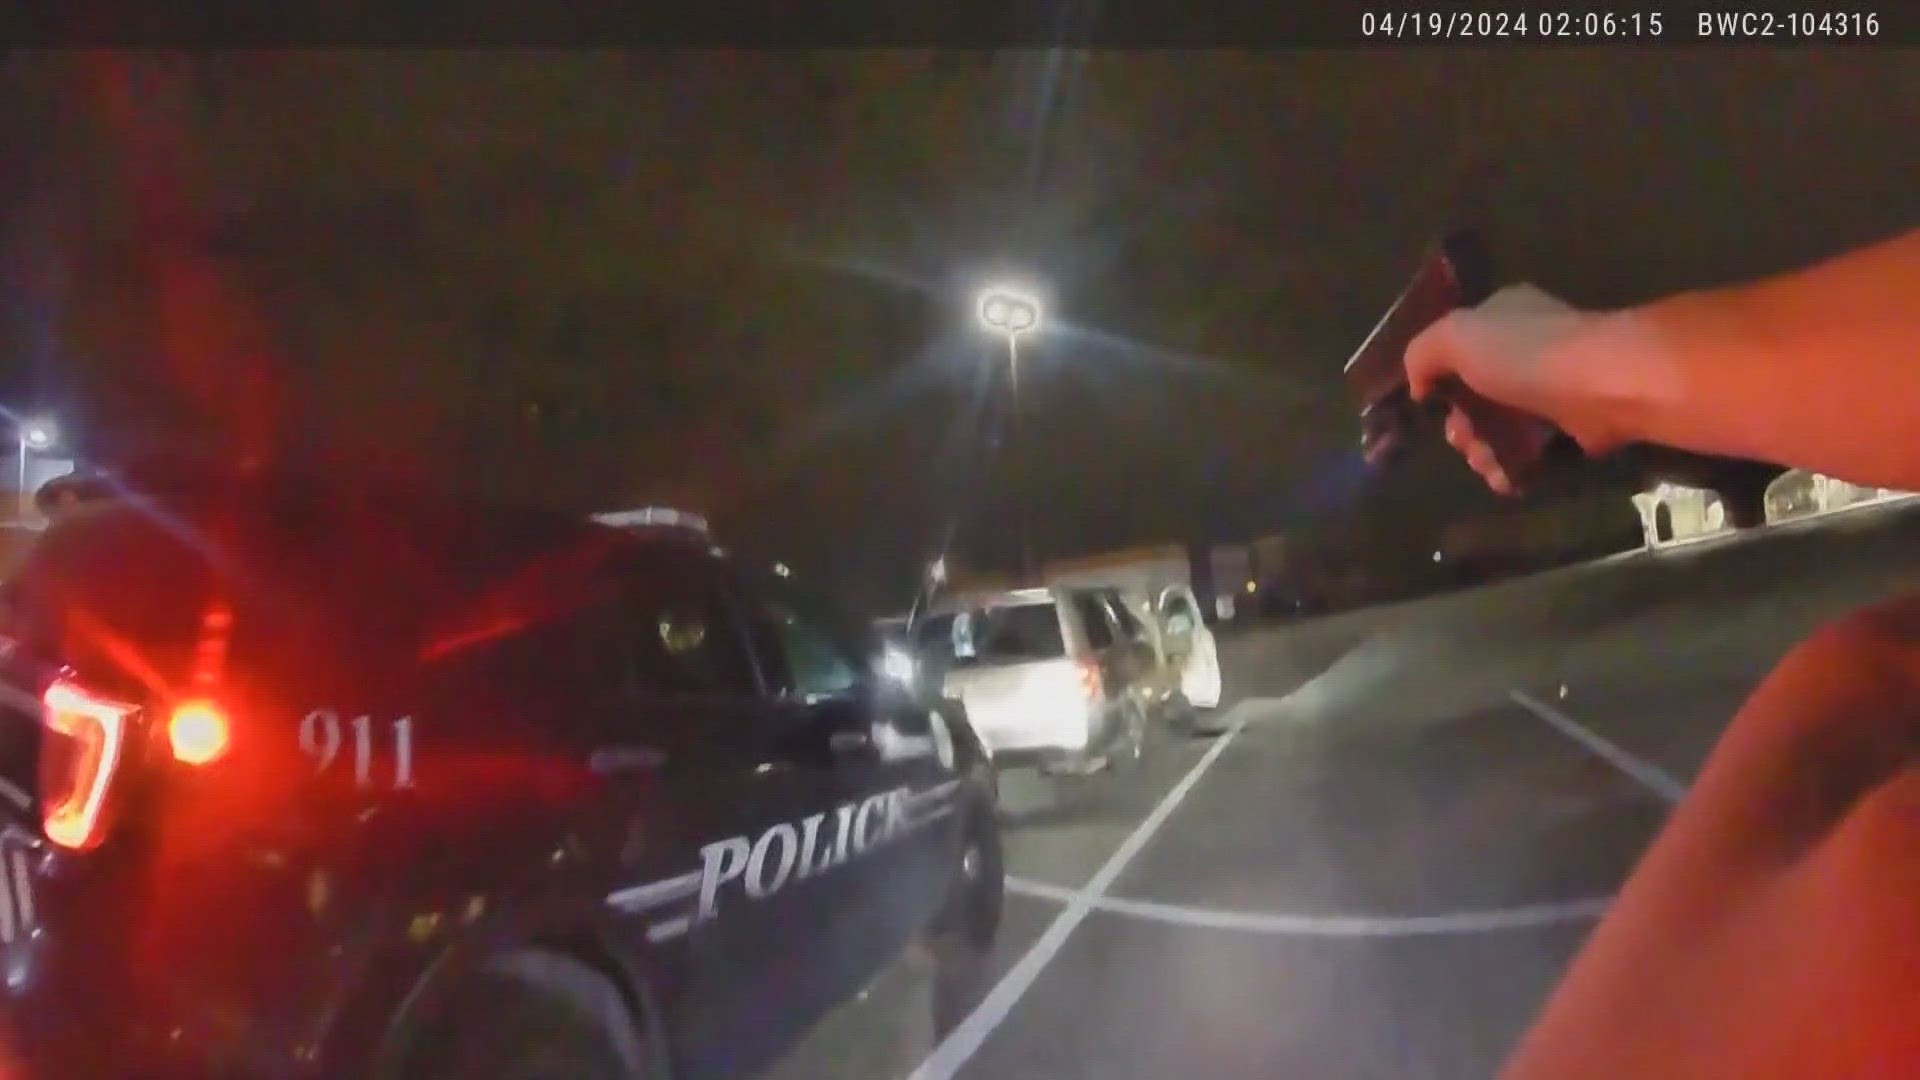 The Whitehall Division of Police released body camera video showing two officers firing shots and killing a suspect early Friday morning.